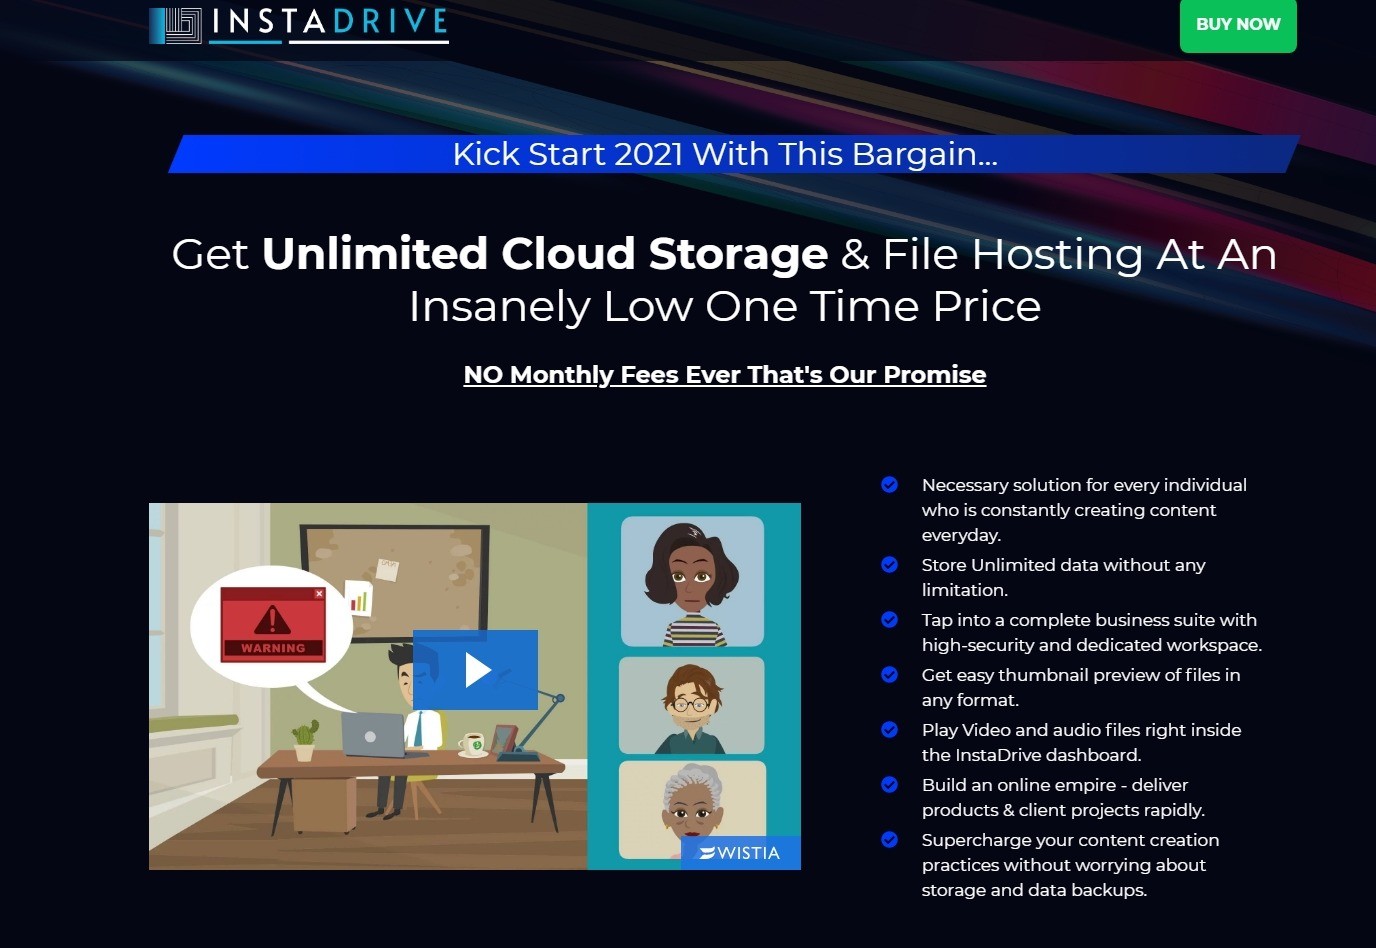 World's First Cloud Storage with Unlimited Storage capacity for businesses, organizations and Individuals who create and store tons of Data everyday with the most user-friendly Cloud Storage dashboard in the world! We didn’t bulk it up with features which real people never use. So, you can find the stuff you need much more easily! 
